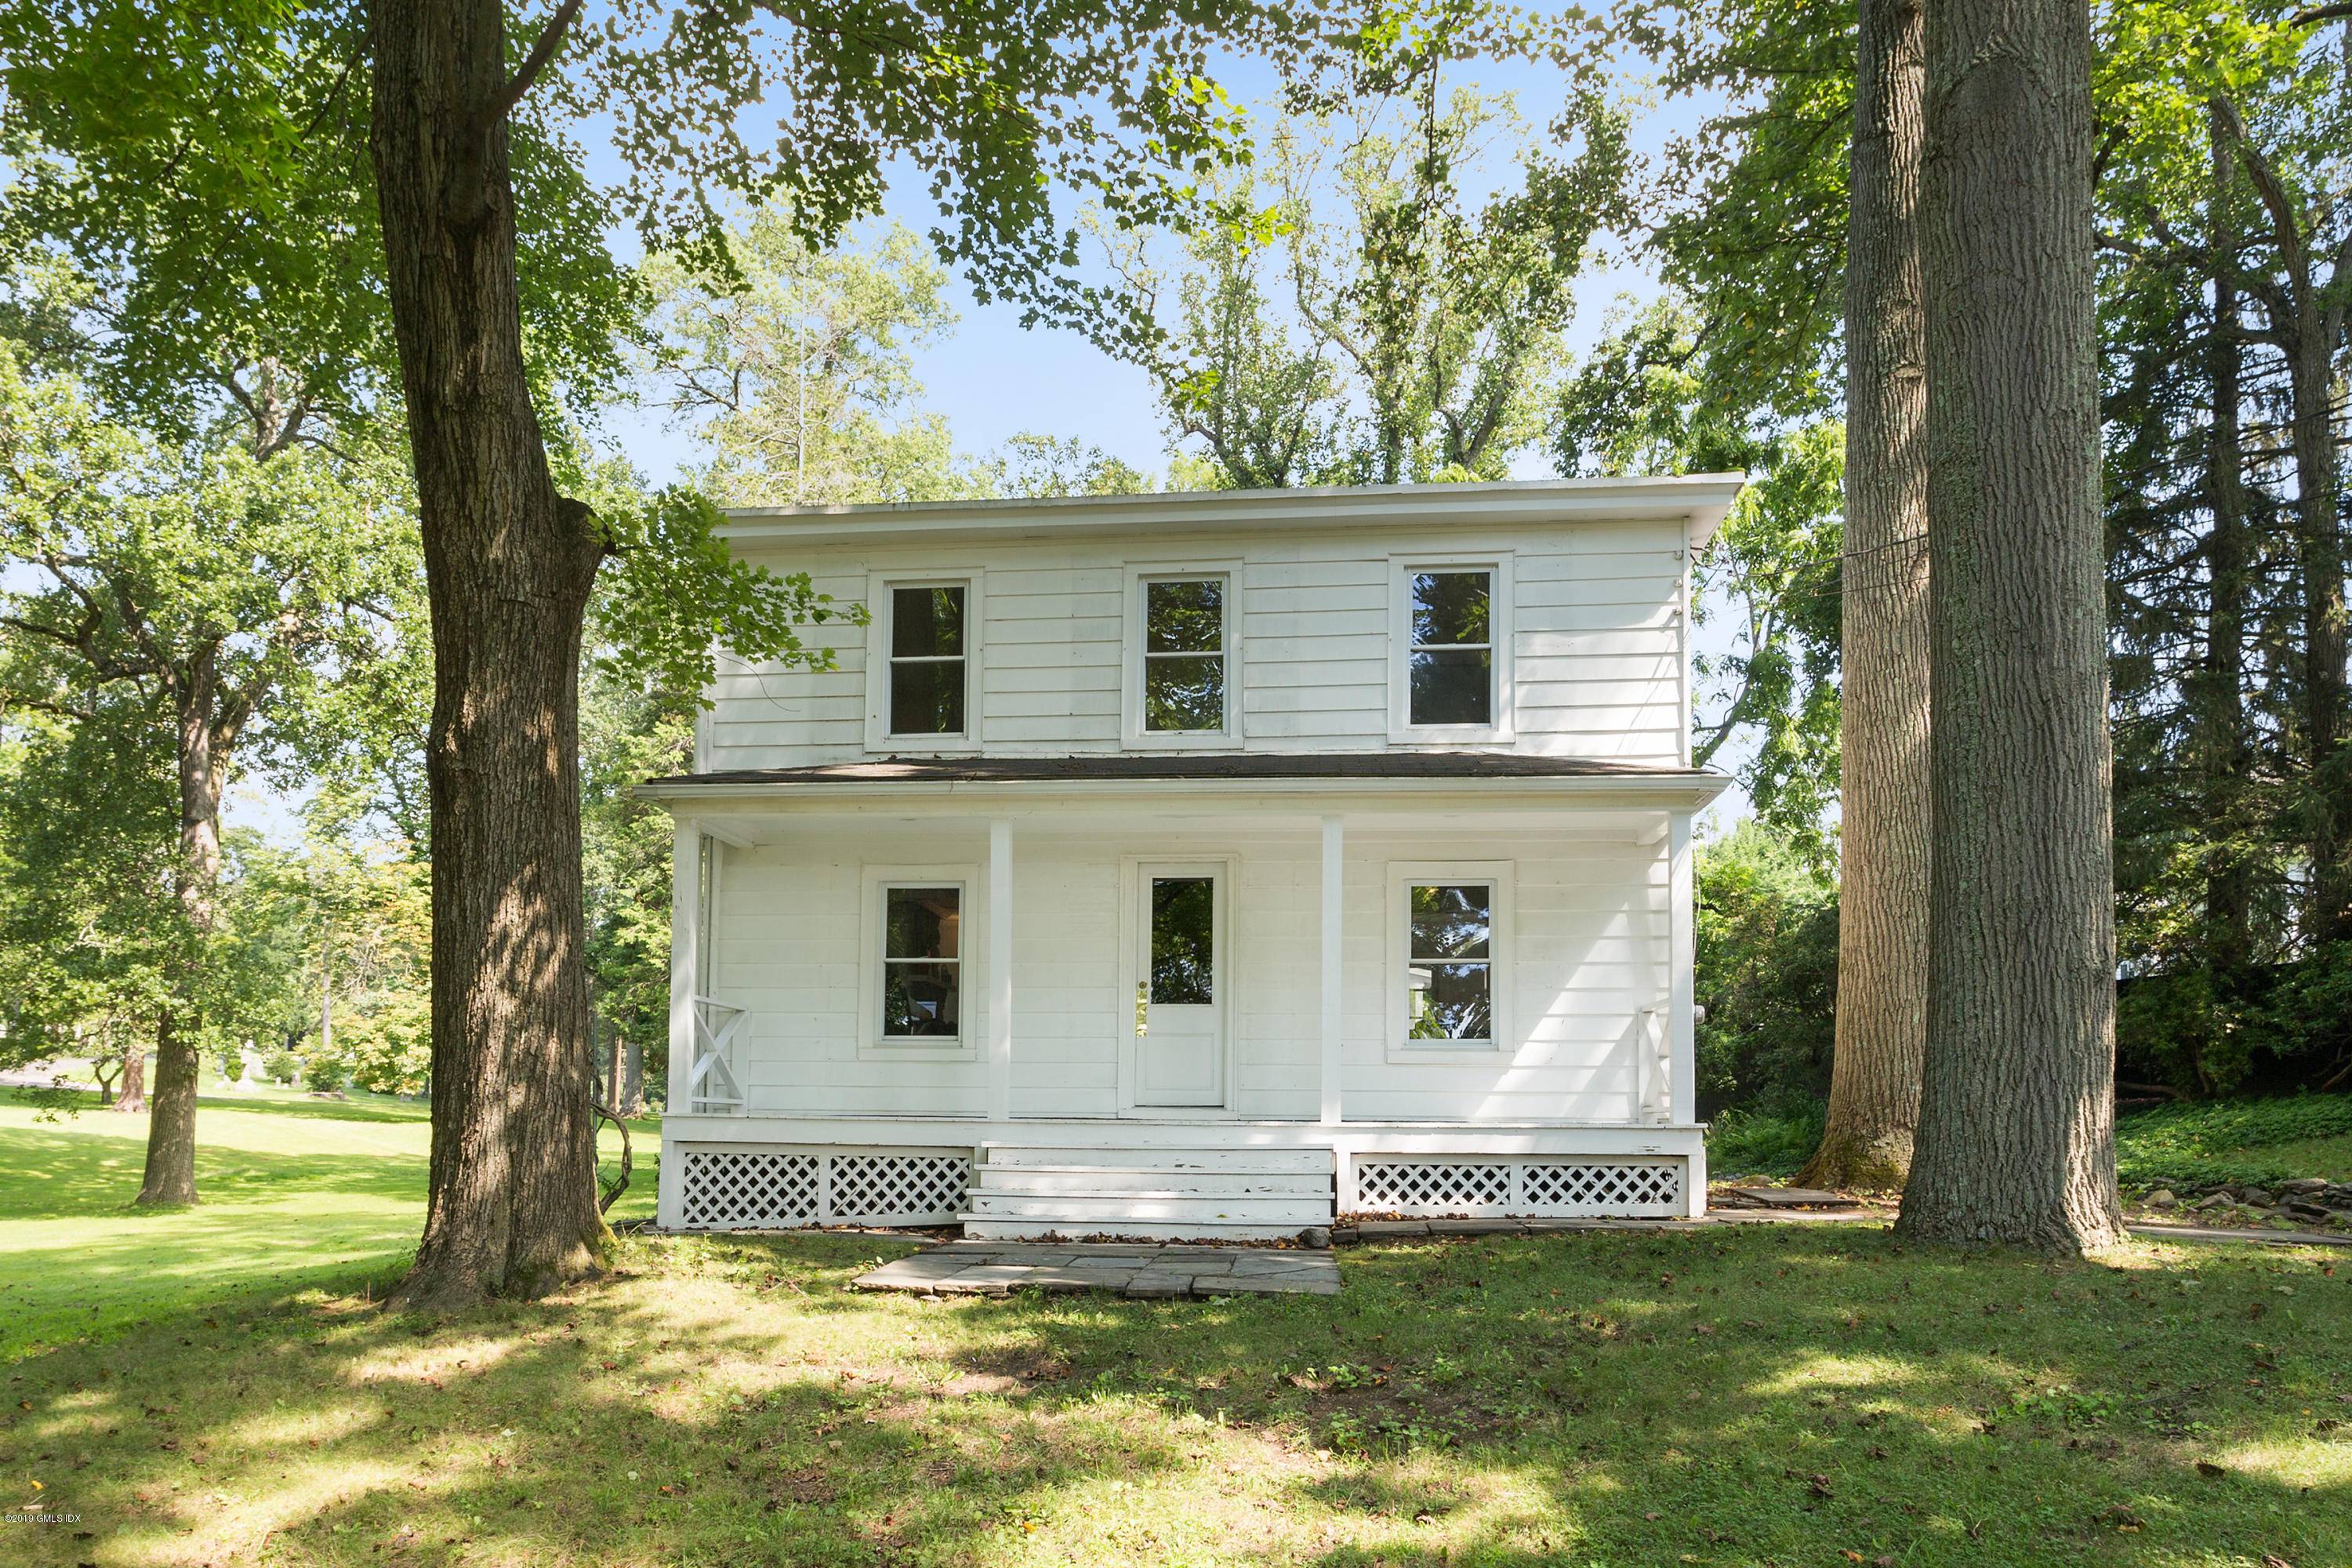 Move right in and enjoy this charming 4 bedroom farm house, close to town and schools.